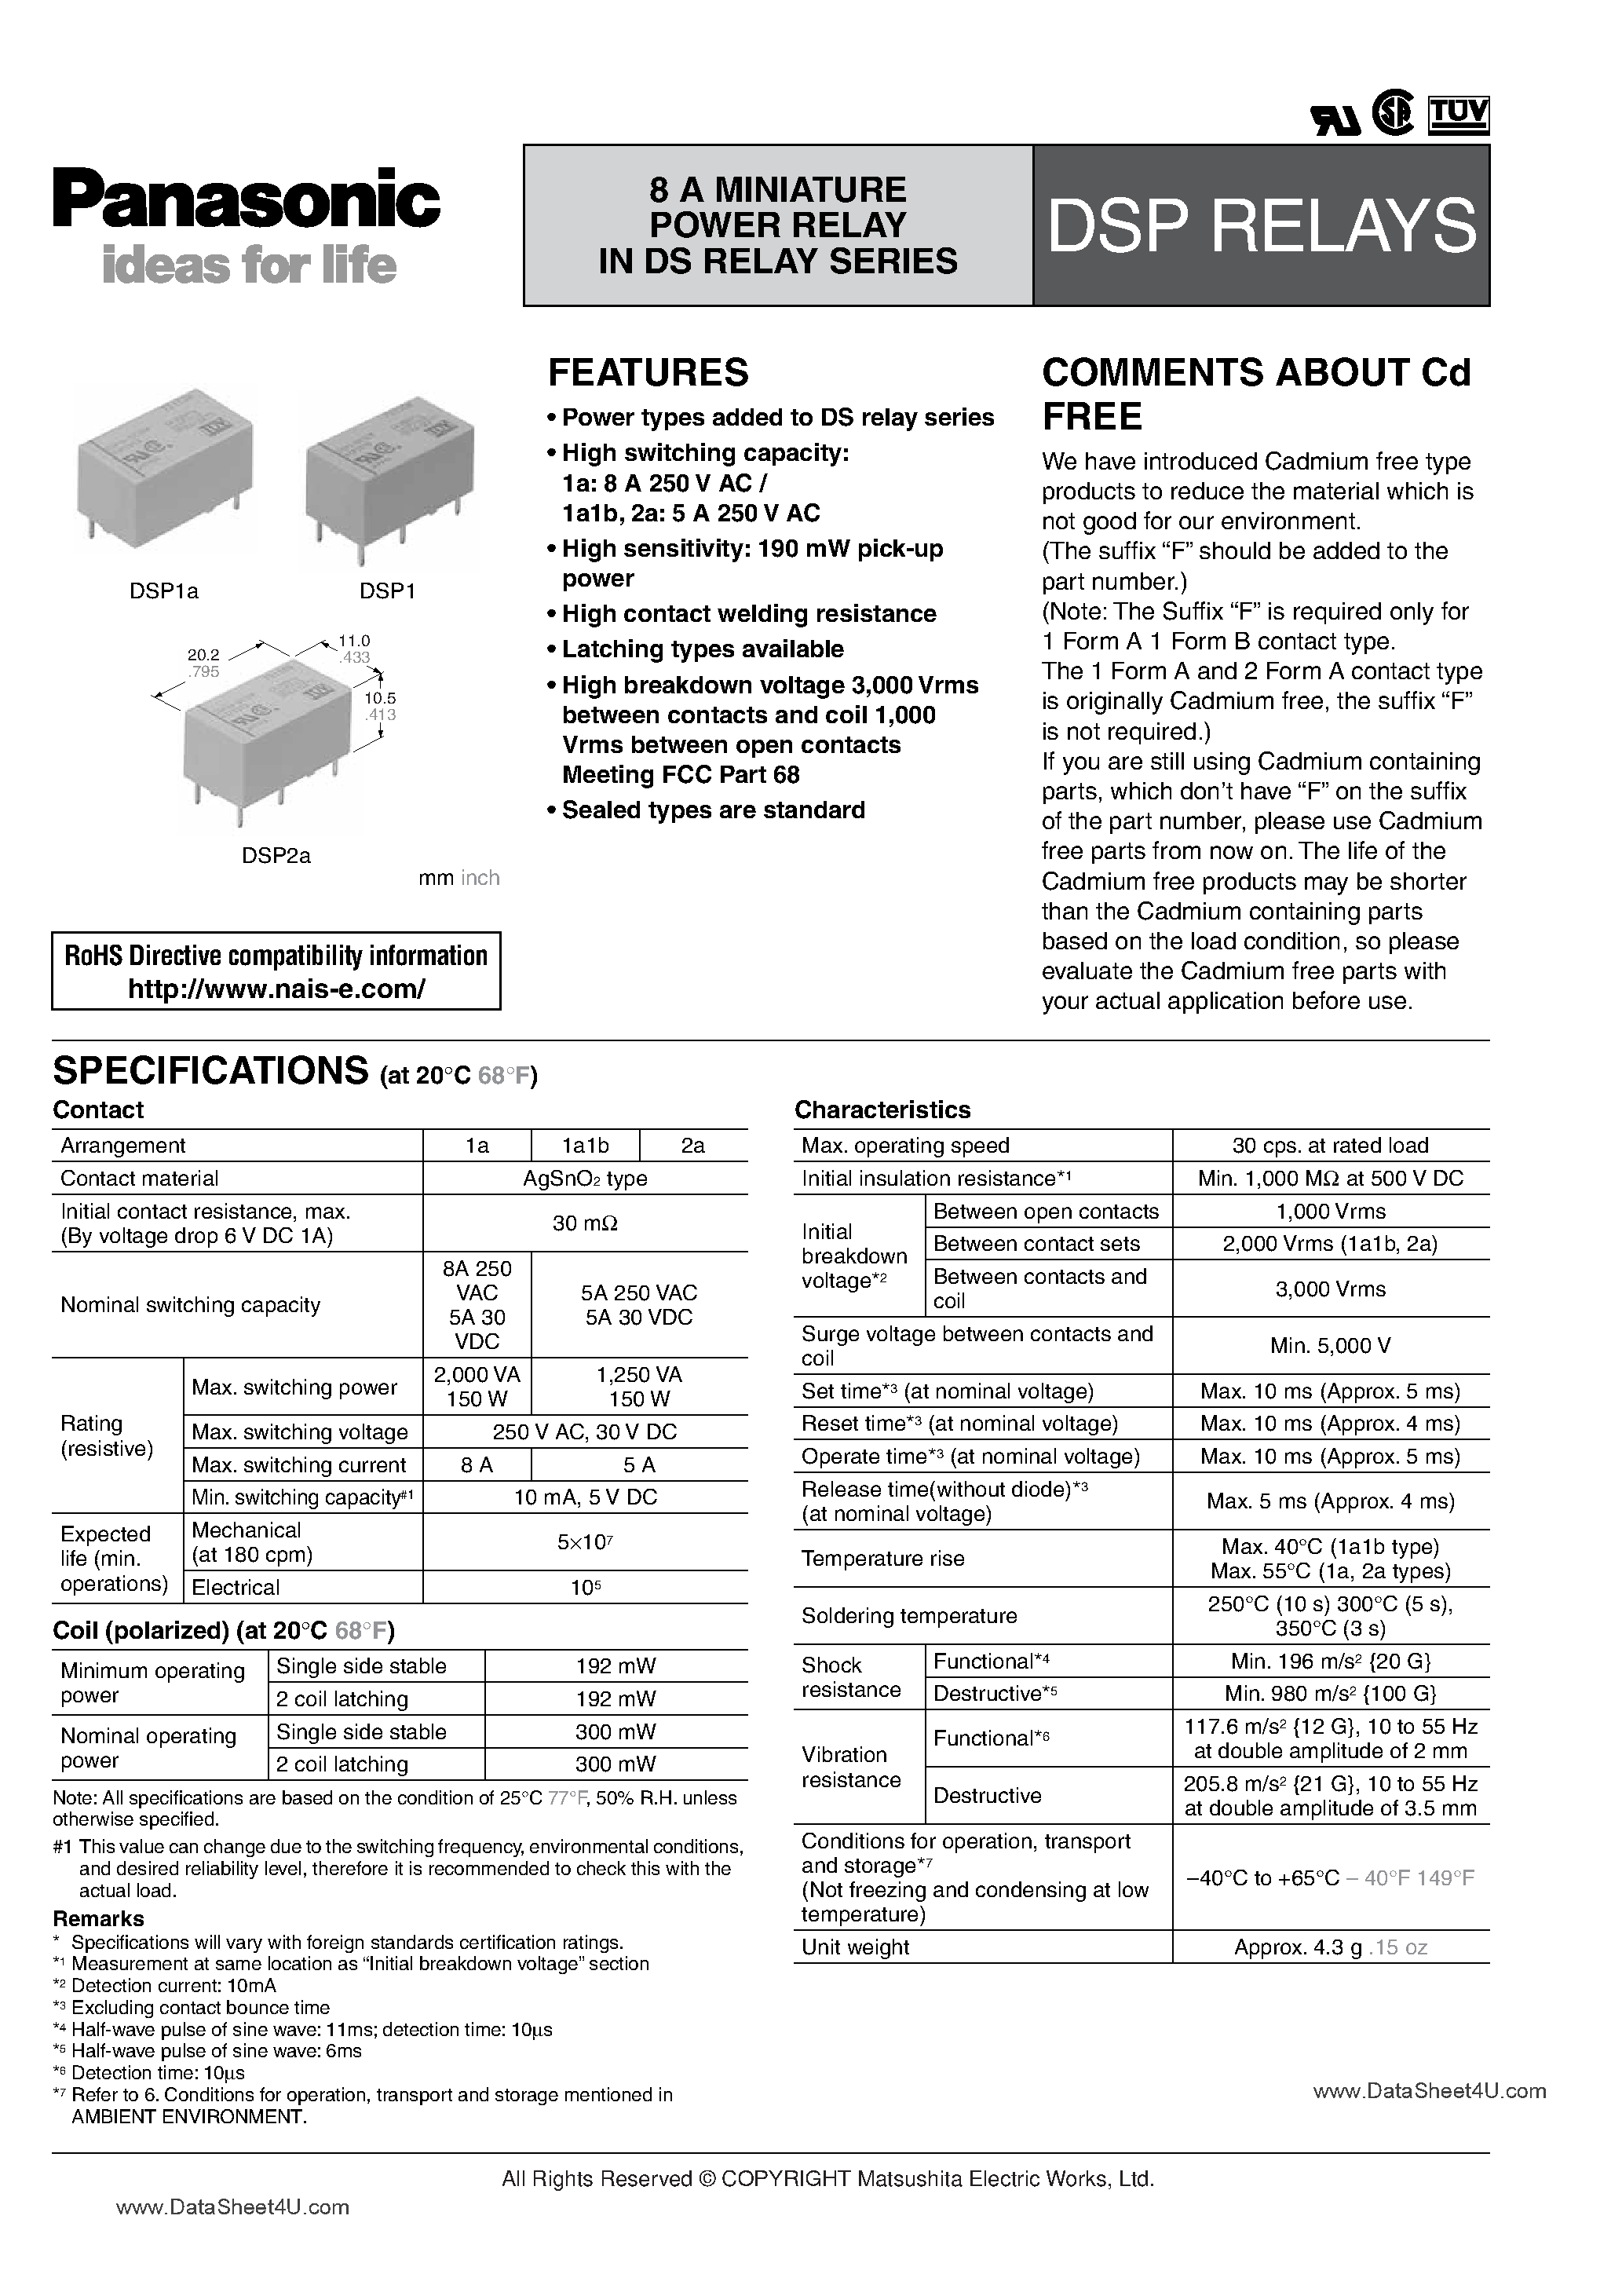 Datasheet DSP1-xxxxV - (DSP Relays) Power Relay page 1